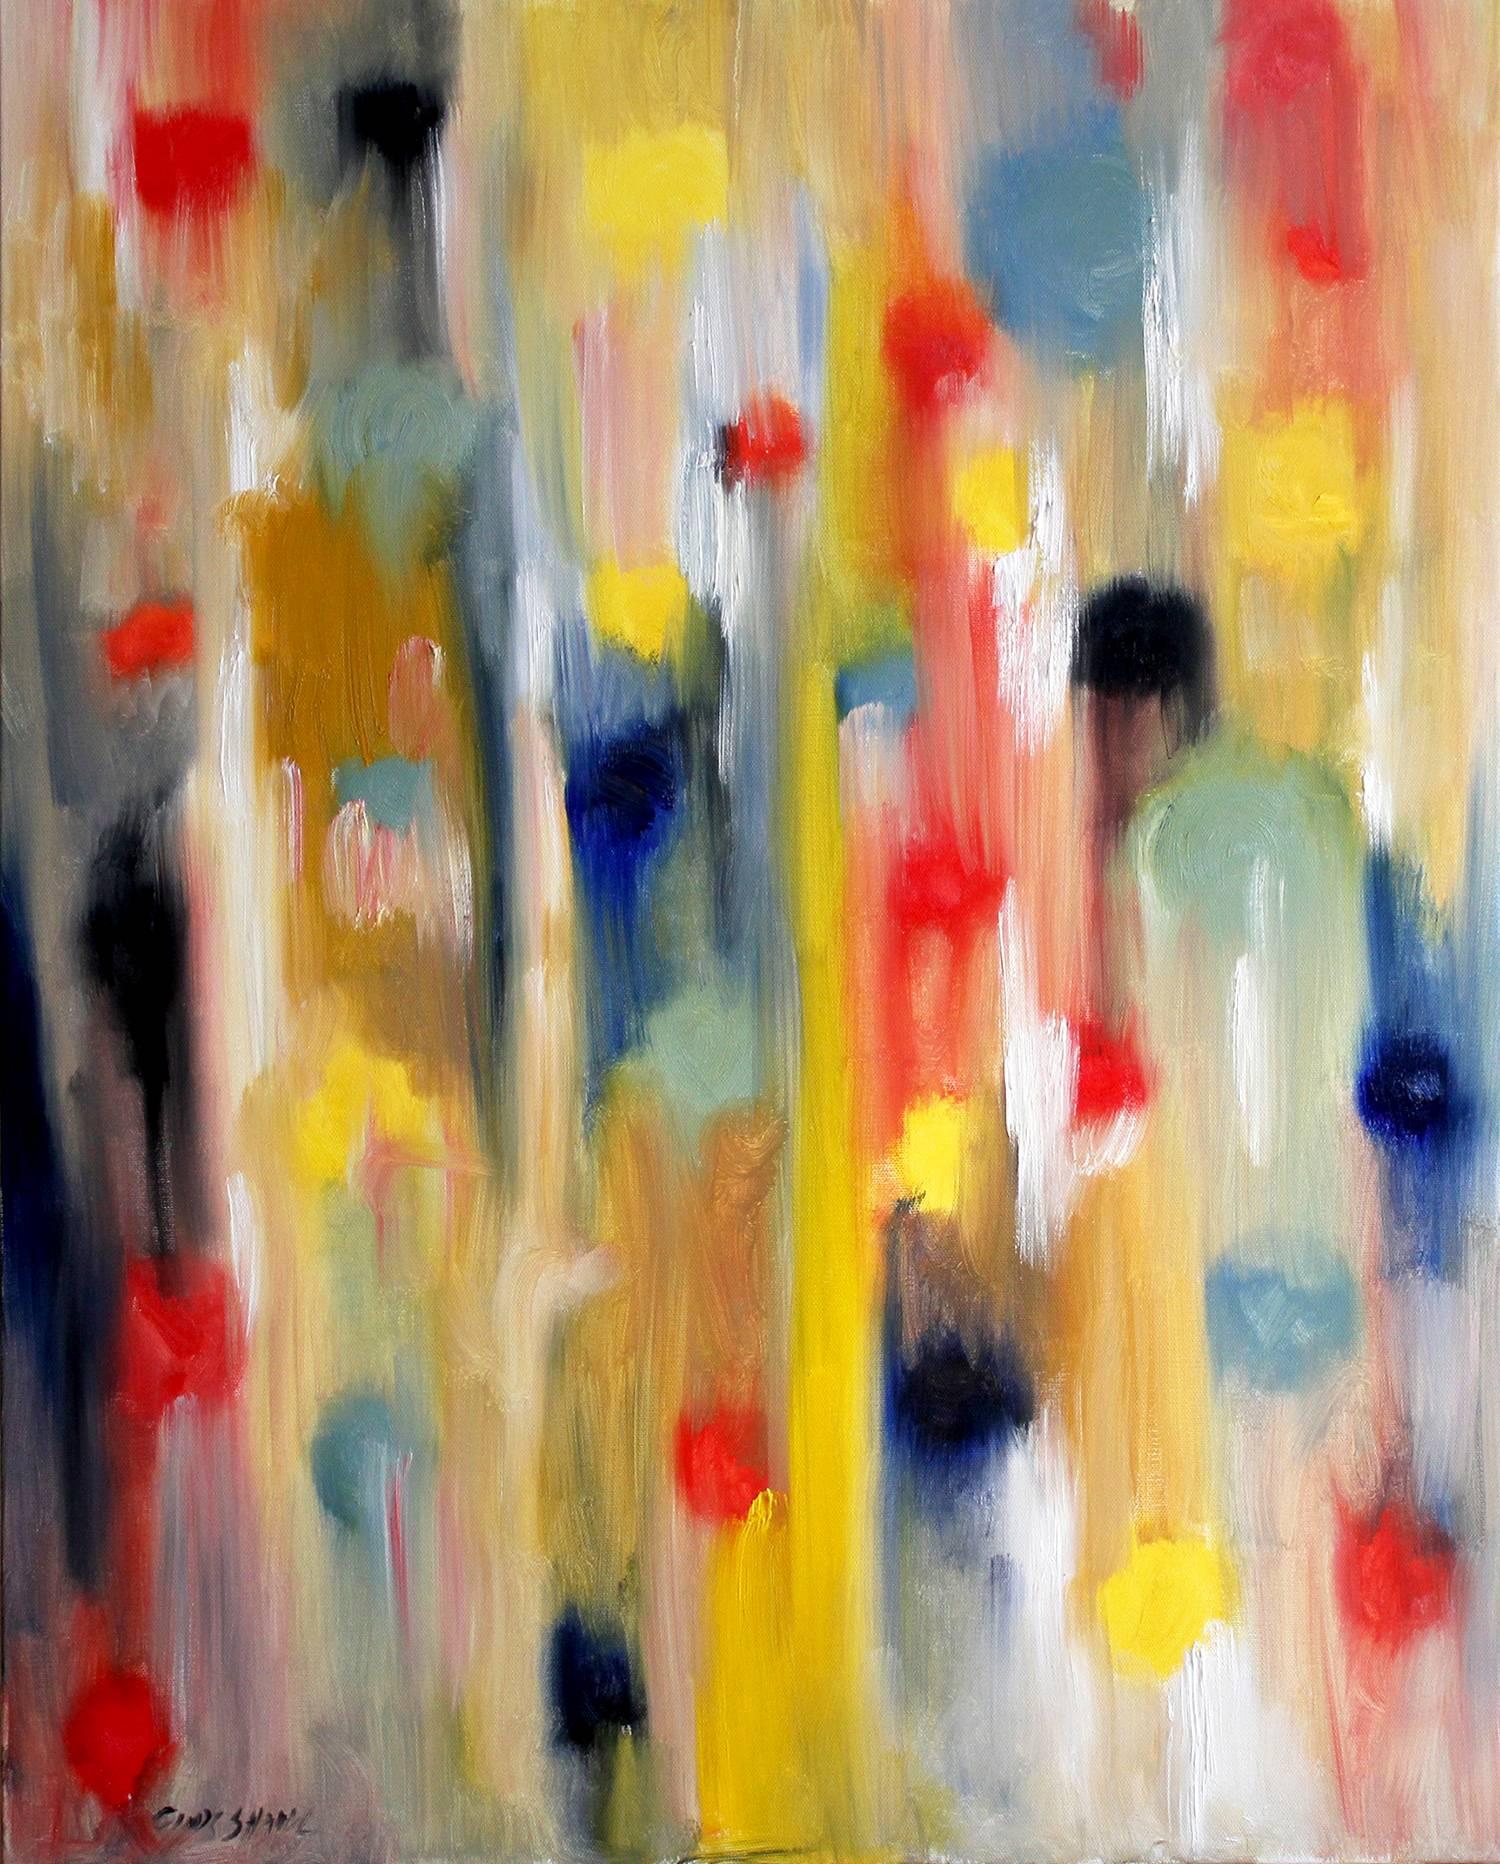 Cindy Shaoul Abstract Painting - Dripping Dots, Lights of St. Barts